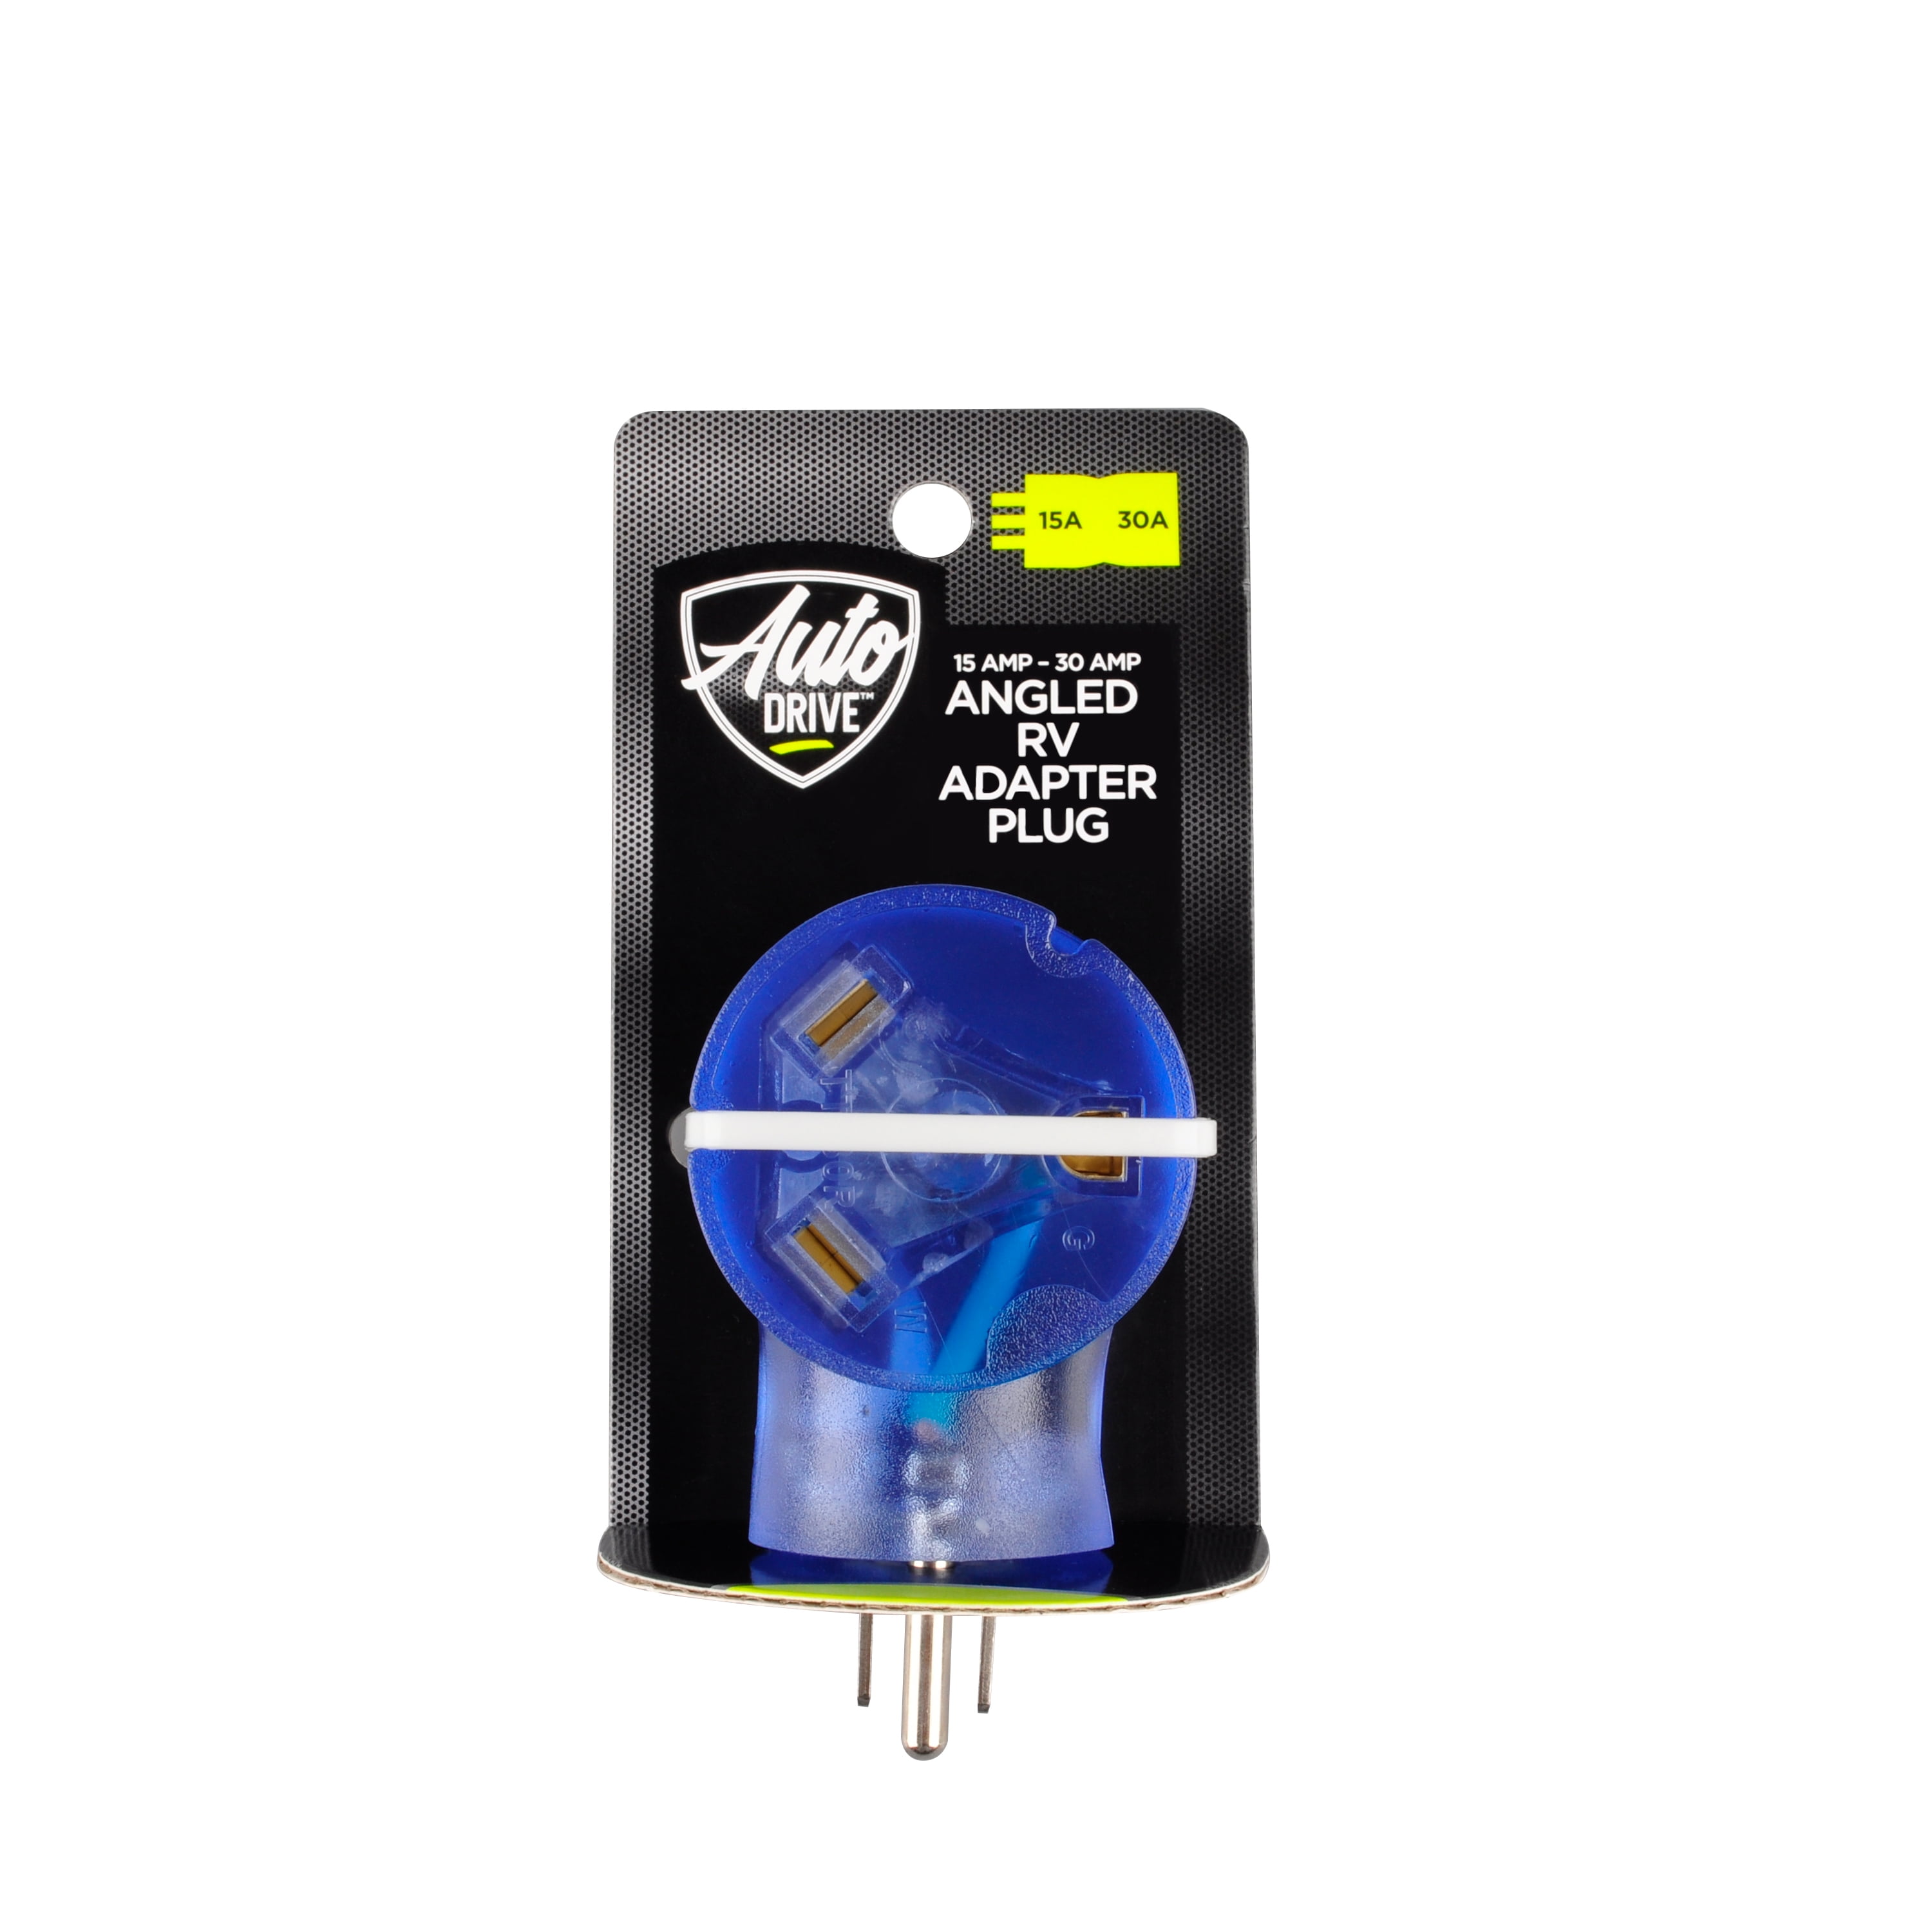 Auto Drive 15 to 30-Amp Angled Universal RV Power Adapter with Light, Clear Blue